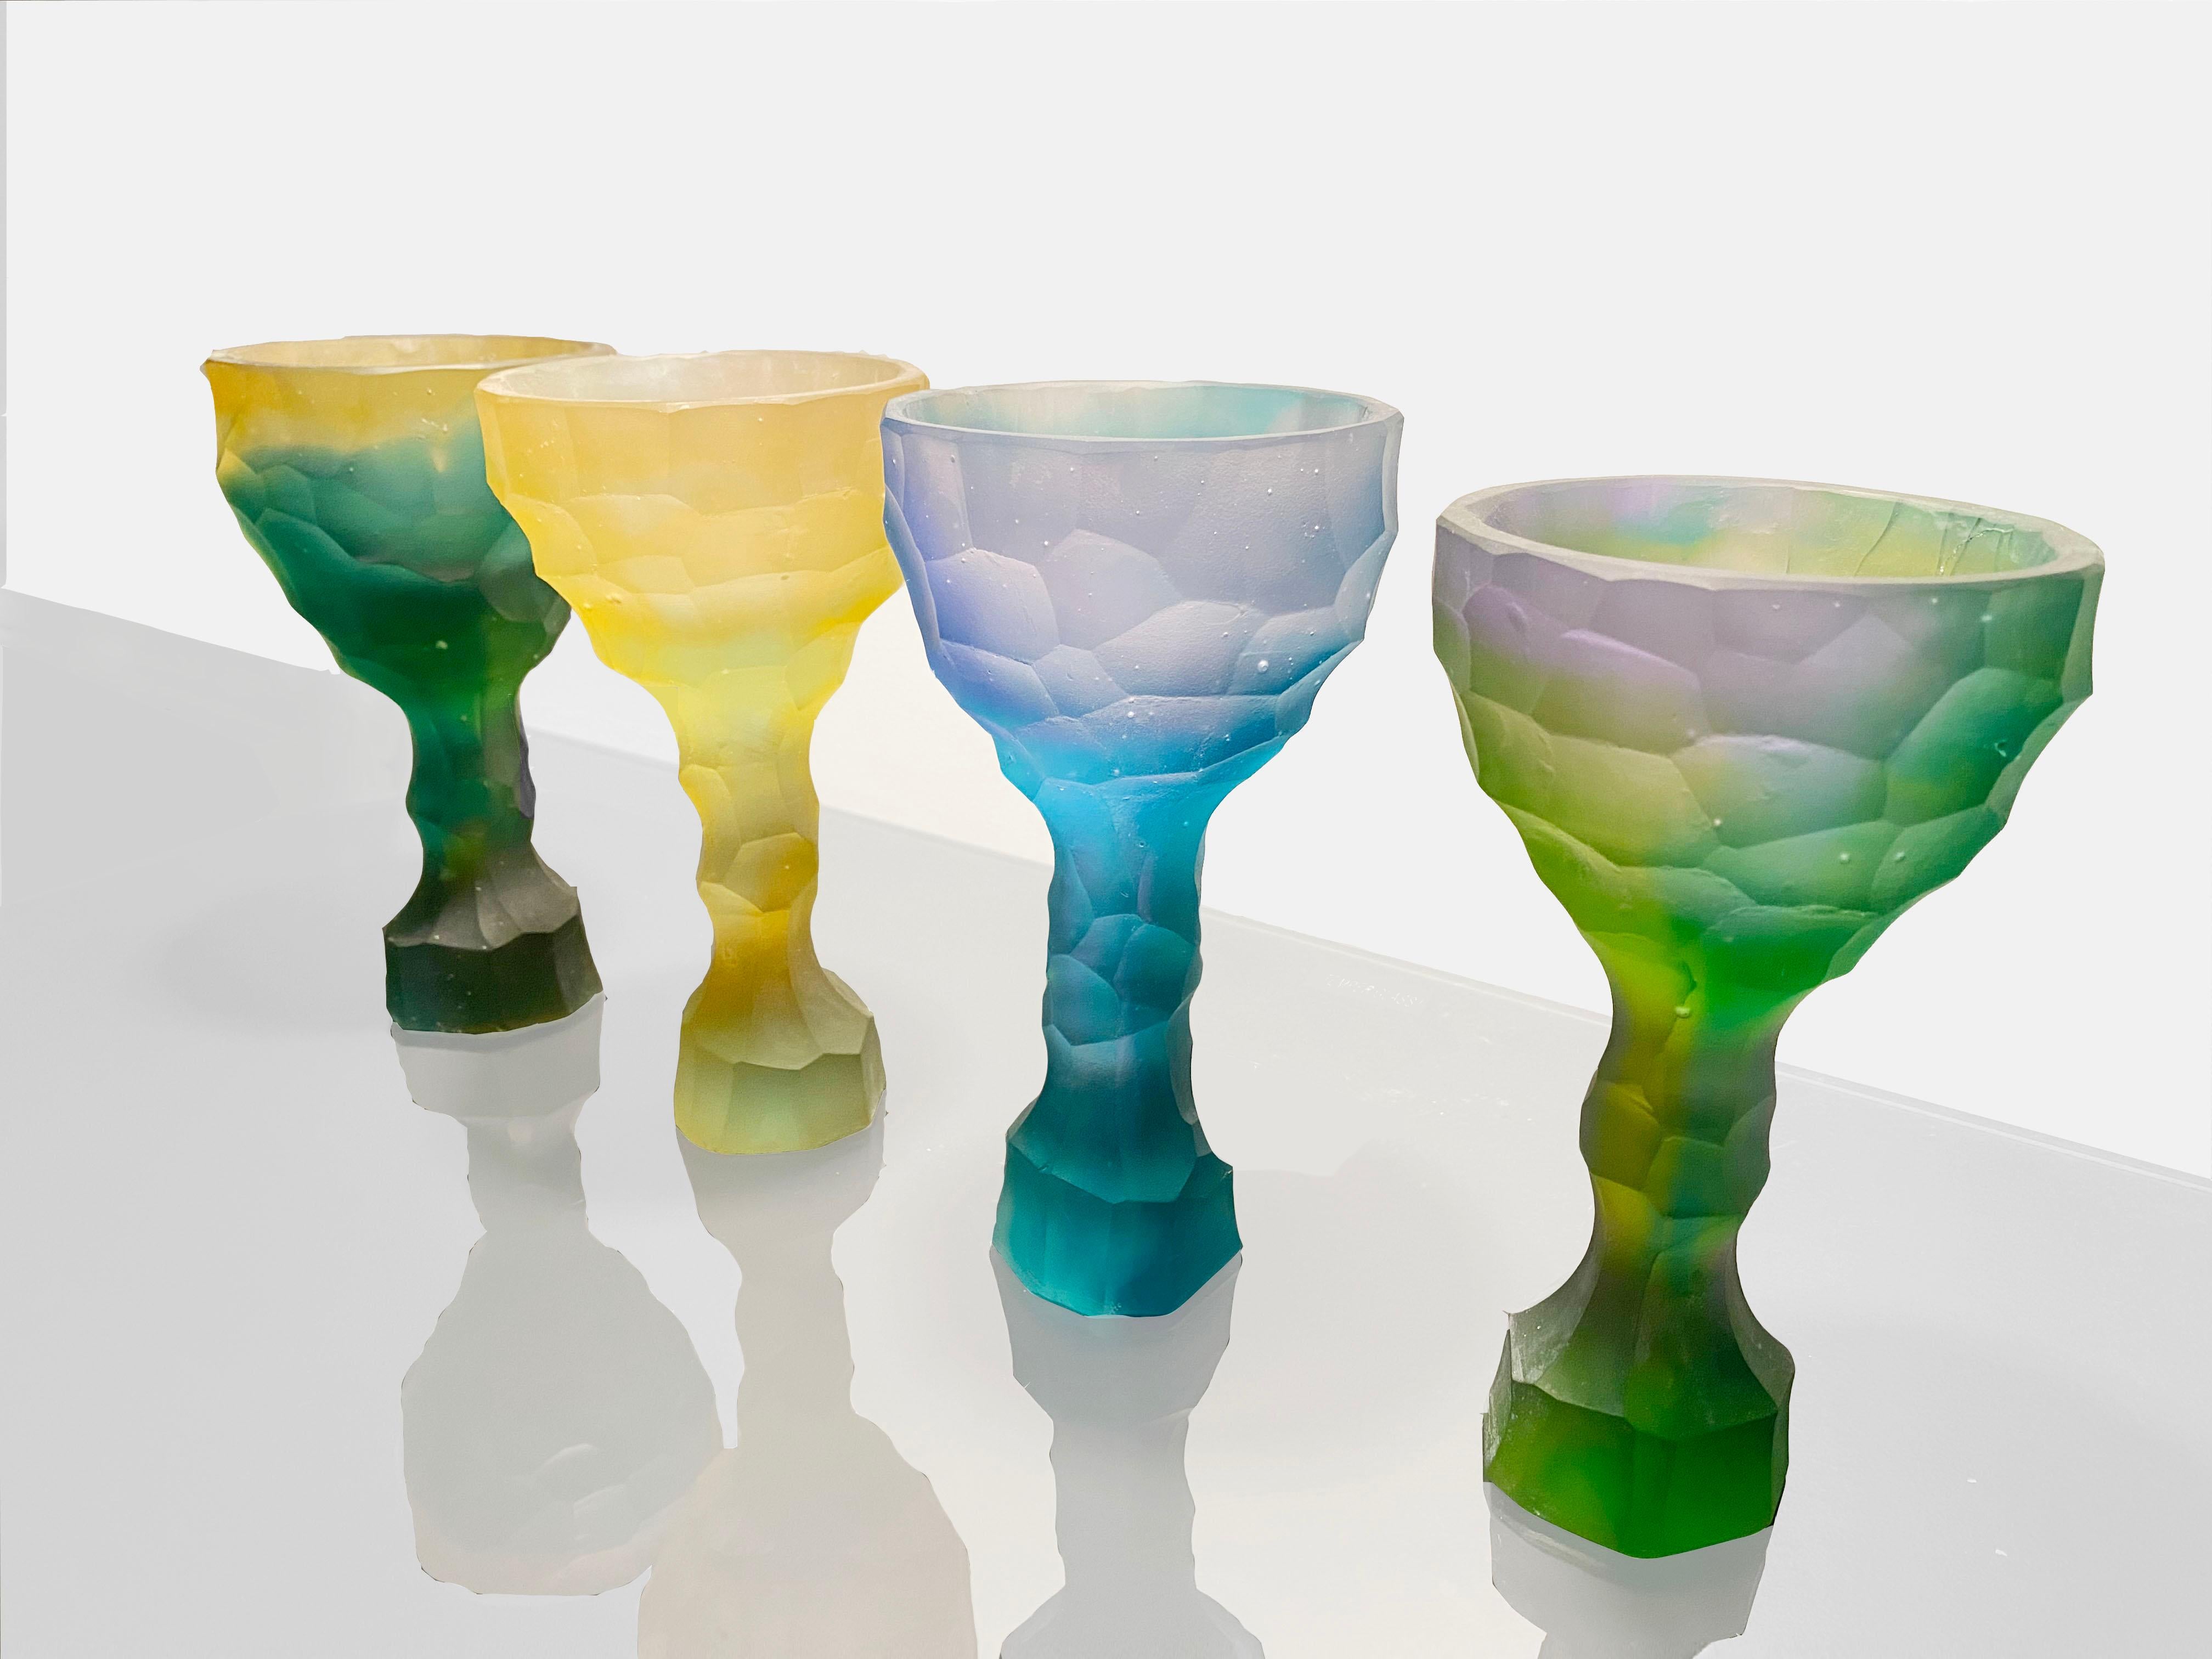 French Green and Orange Hand-Sculpted Crystal Glass by Alissa Volchkova